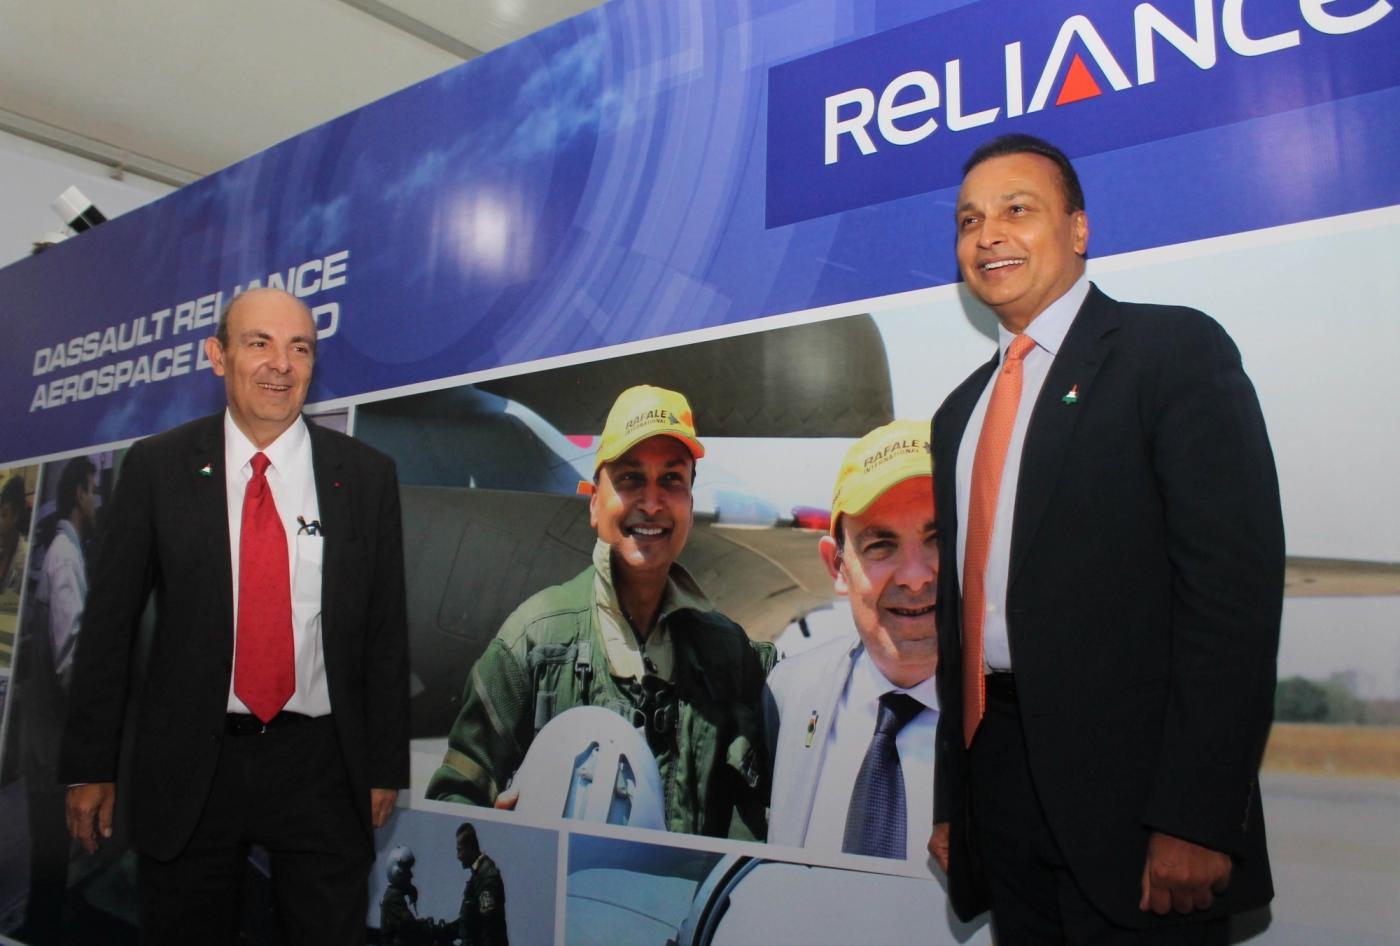 Mihan: Dassault Aviation, France Chairman Eric Trappier and Reliance Group Chairman Anil Ambani during the foundation stone laid ceremony for the Rs 6,500 crore-Dassault Reliance Aerospace Limited (DRAL) manufacturing facility that will manufacture components of the offset obligation linked to the purchase of 36 Rafale jets from France; at the Mihan SEZ adjoining Nagpur on Oct 27, 2017. (Photo: IANS) by .